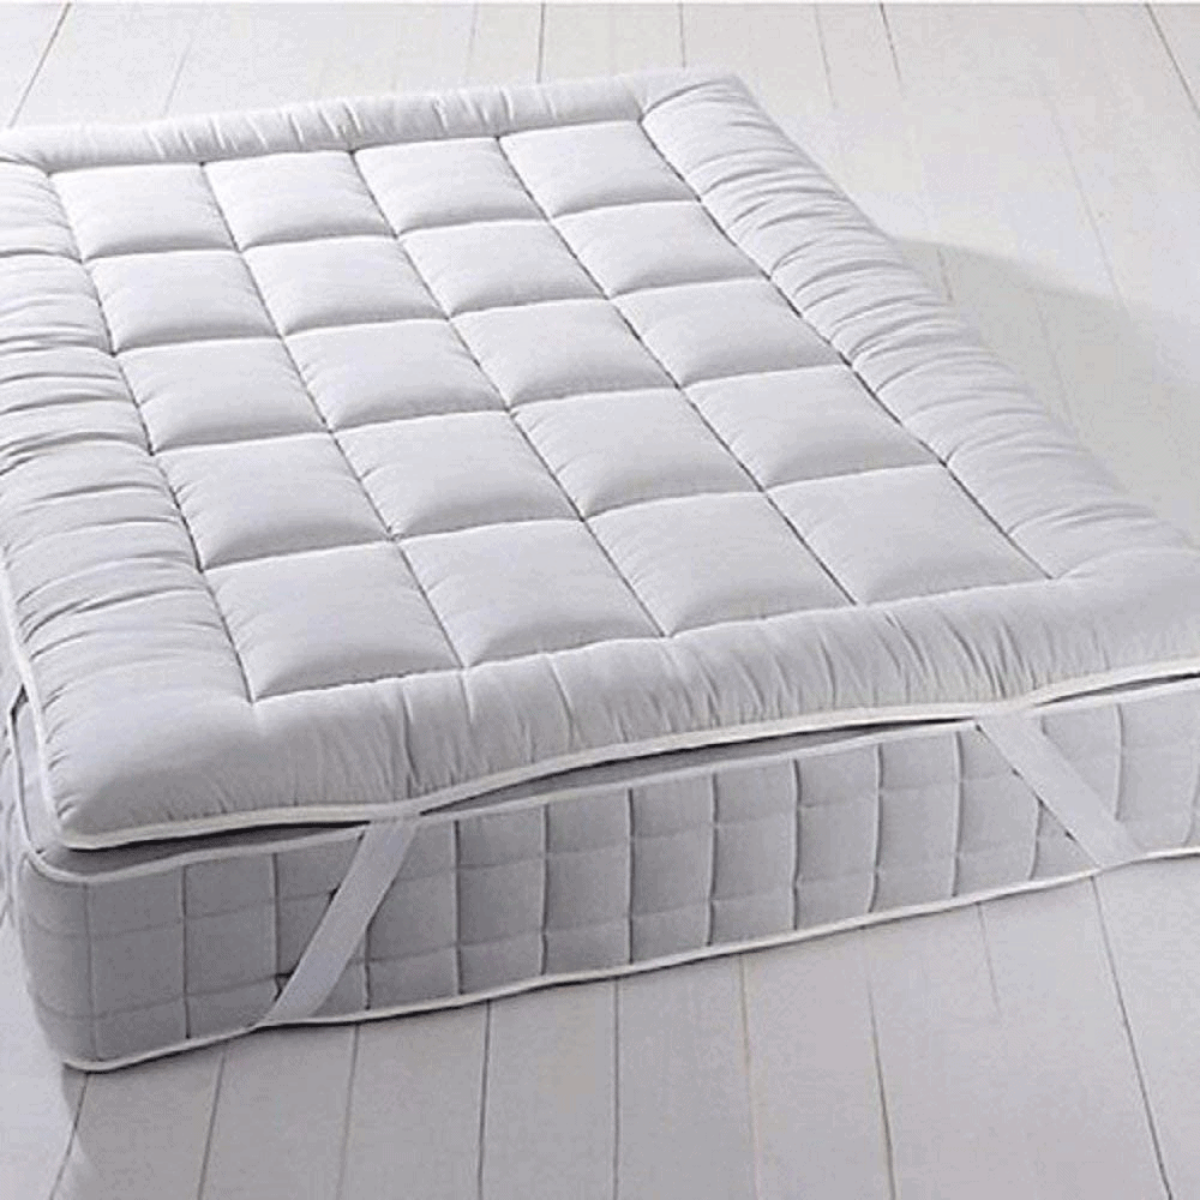 Should a mattress topper be put under or over a mattress protector